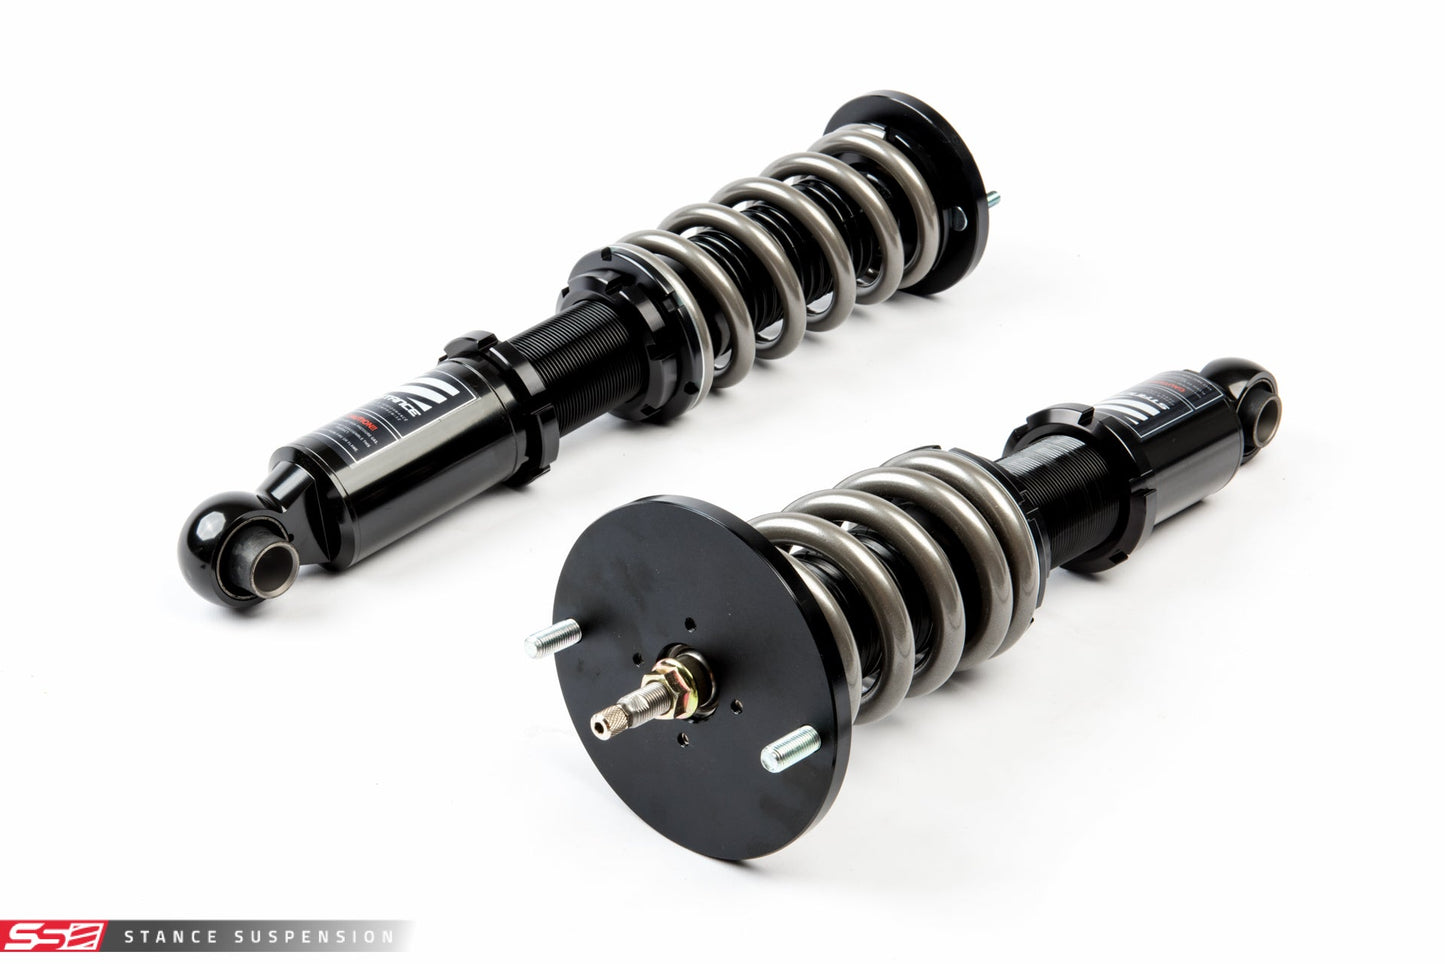 Stance Suspension - XR1 Coilovers for 89-93 Nissan Skyline GTS R32 (ST-HCR32-XR1)